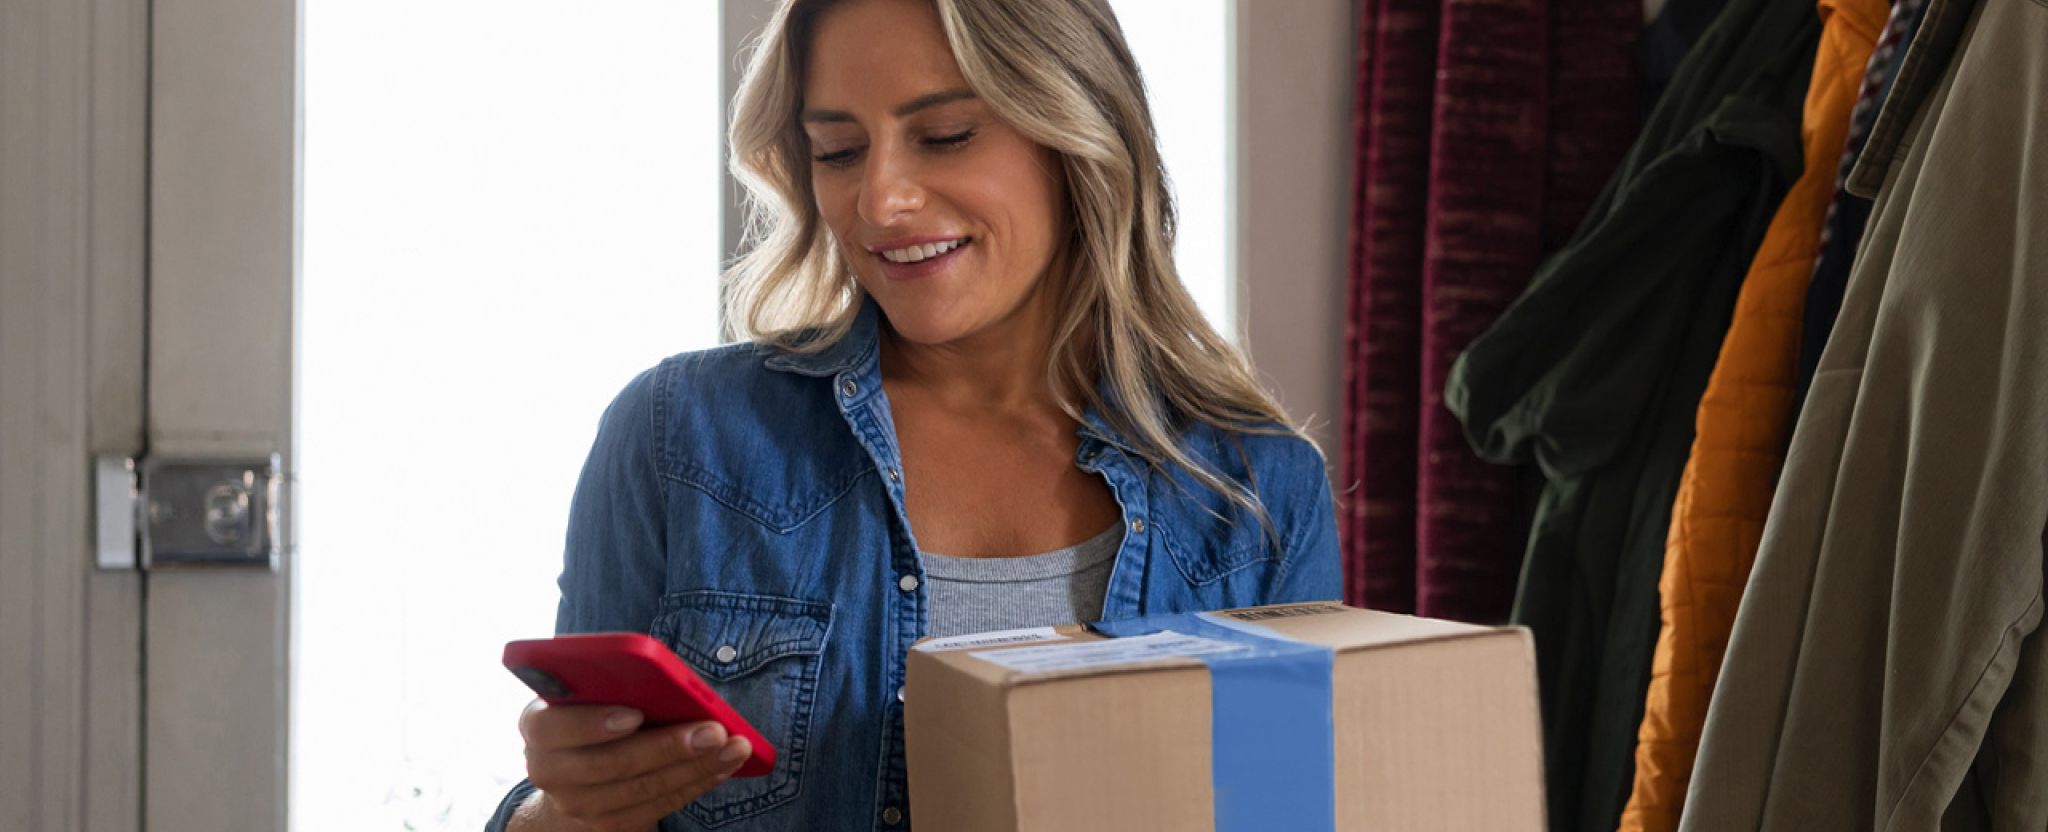 A smiling woman looks at her smart phone as she holds a package.